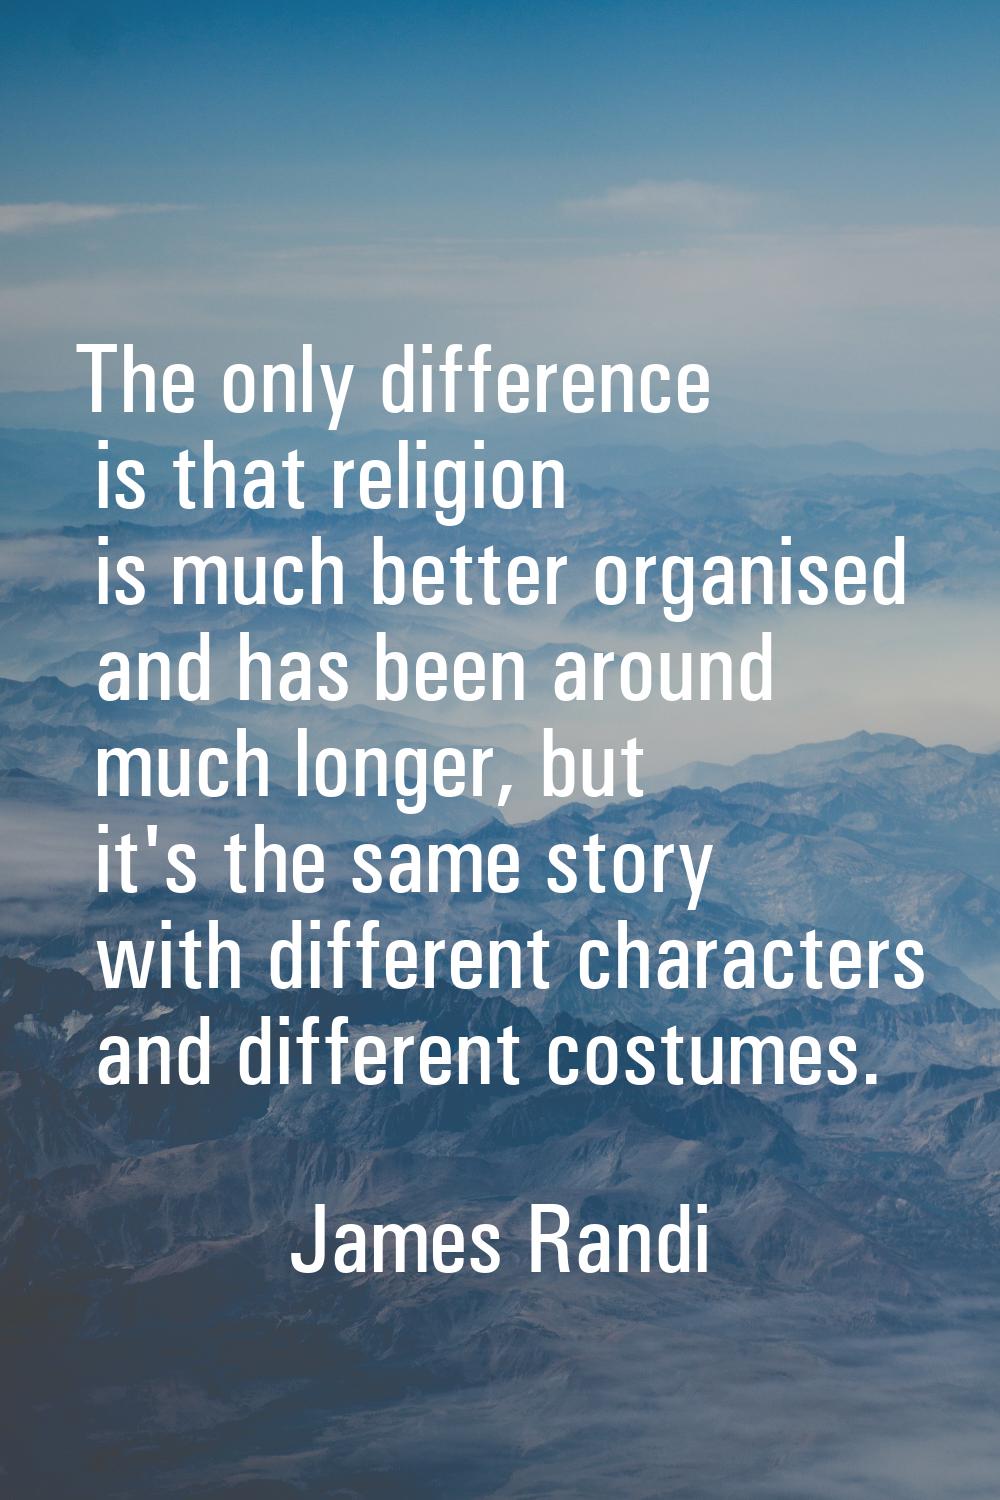 The only difference is that religion is much better organised and has been around much longer, but 